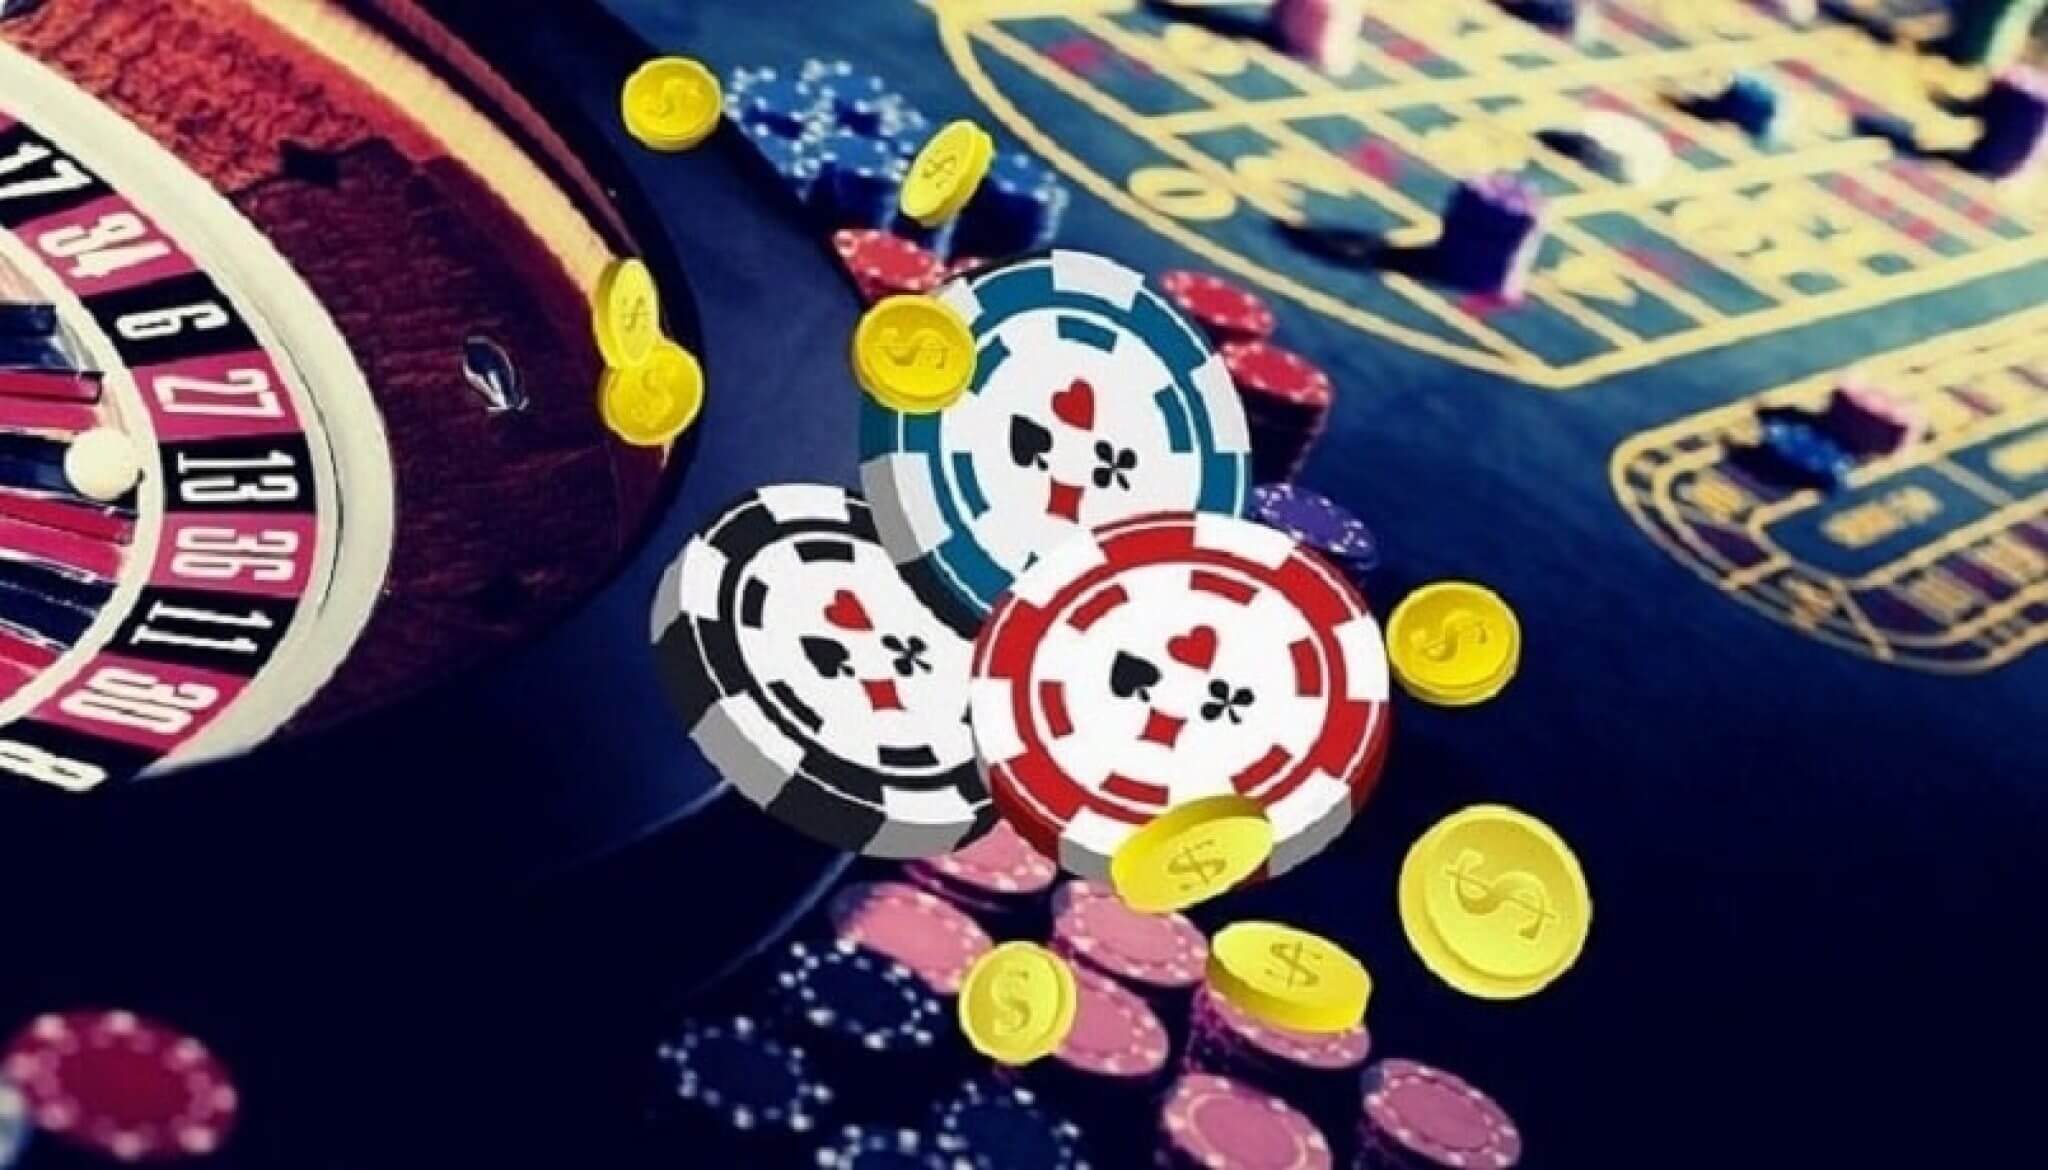 Portal with articles on online casino cool information